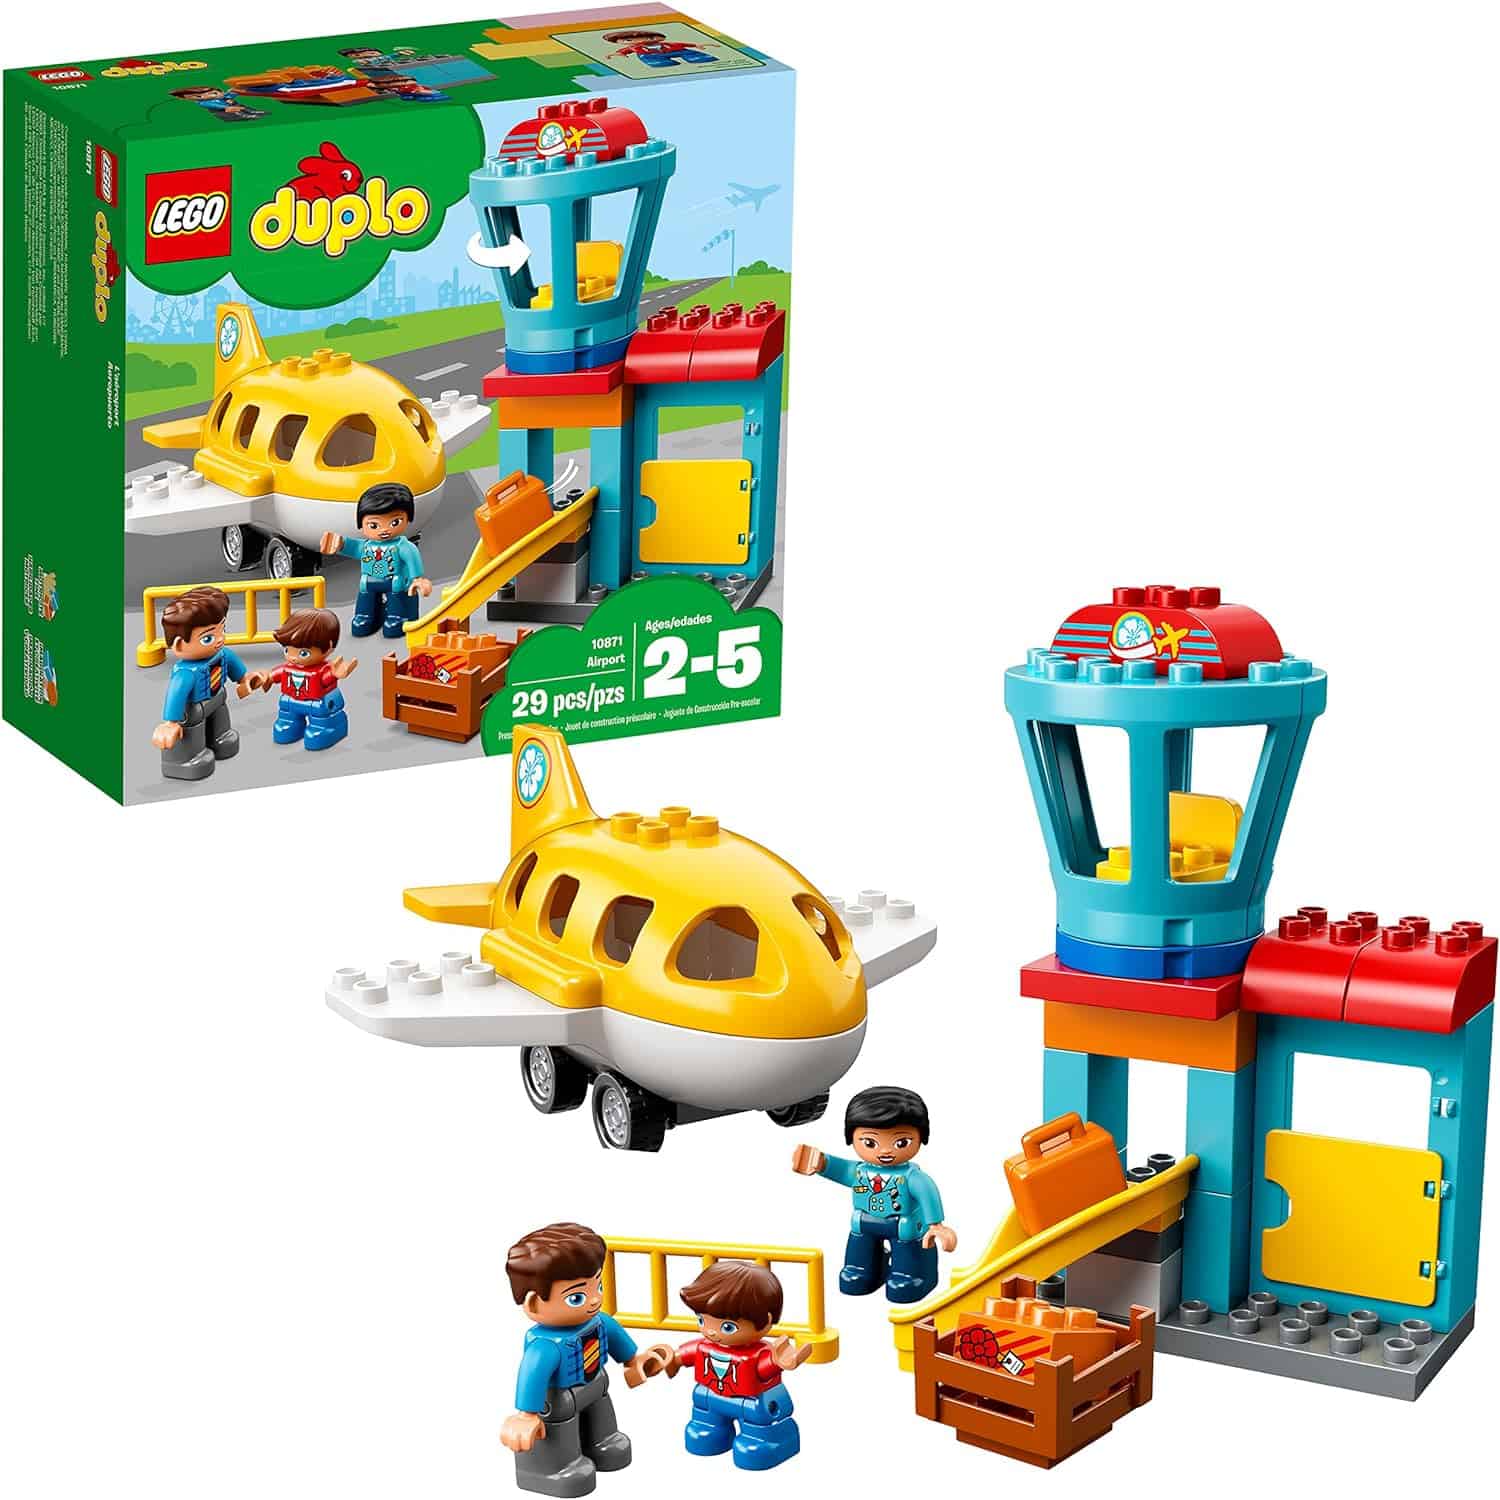 Airport Duplo LEGO sets - Ages 2 to 5 years